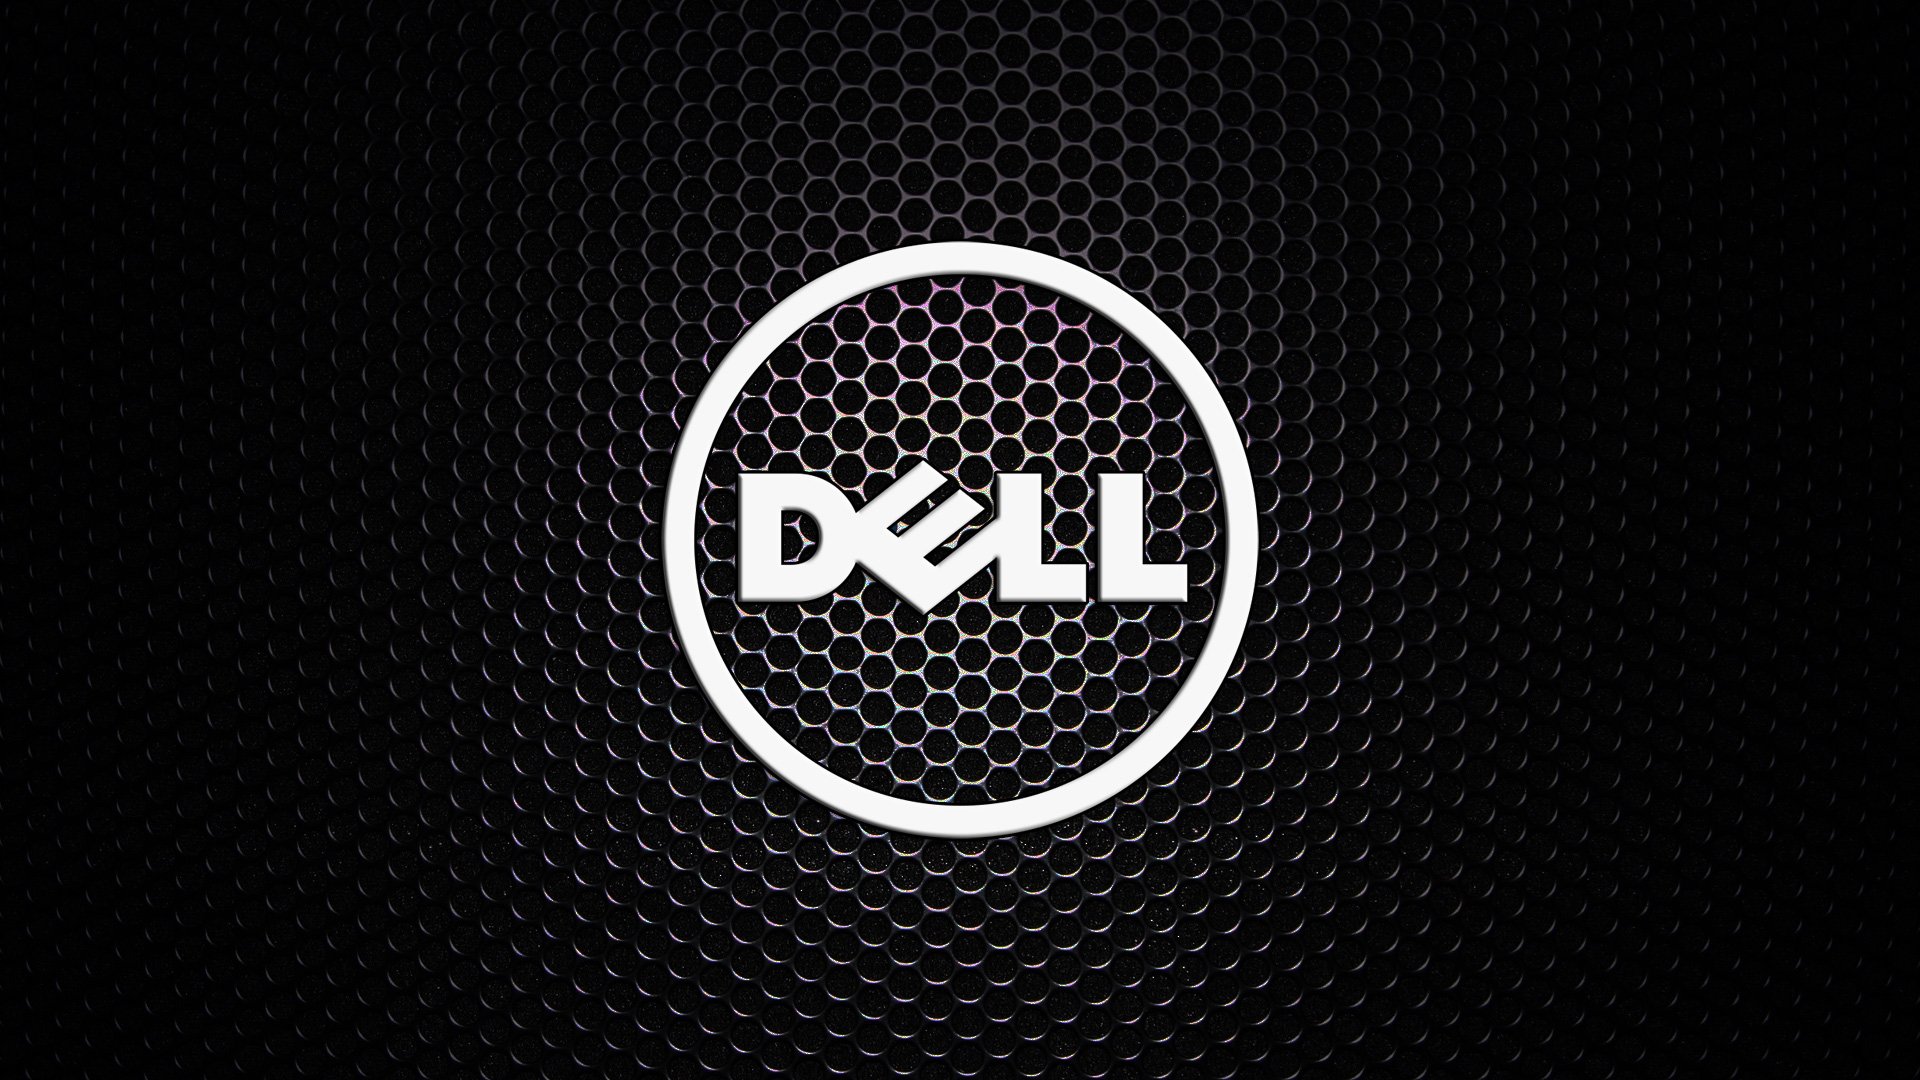 Dell warns of data breach, 49 million customers allegedly affected (2 minute read)